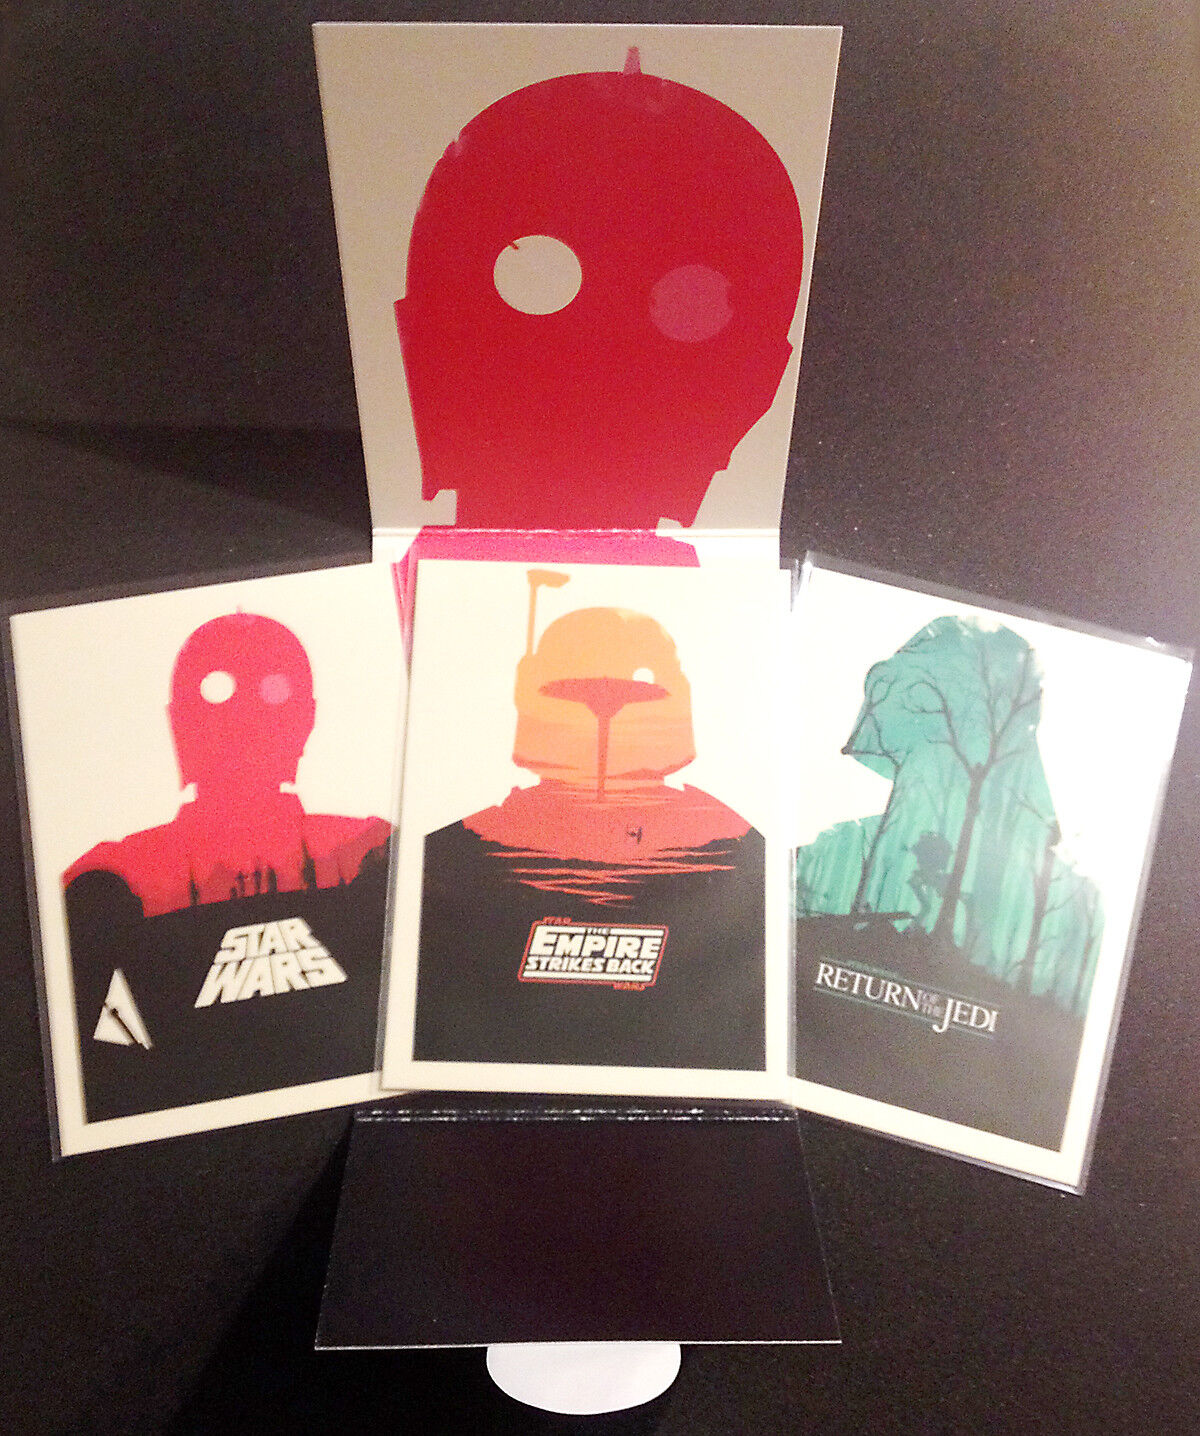 STAR WARS Olly Moss 3 Card Collection - Mondo Limited Edition Set - 1 of 1000